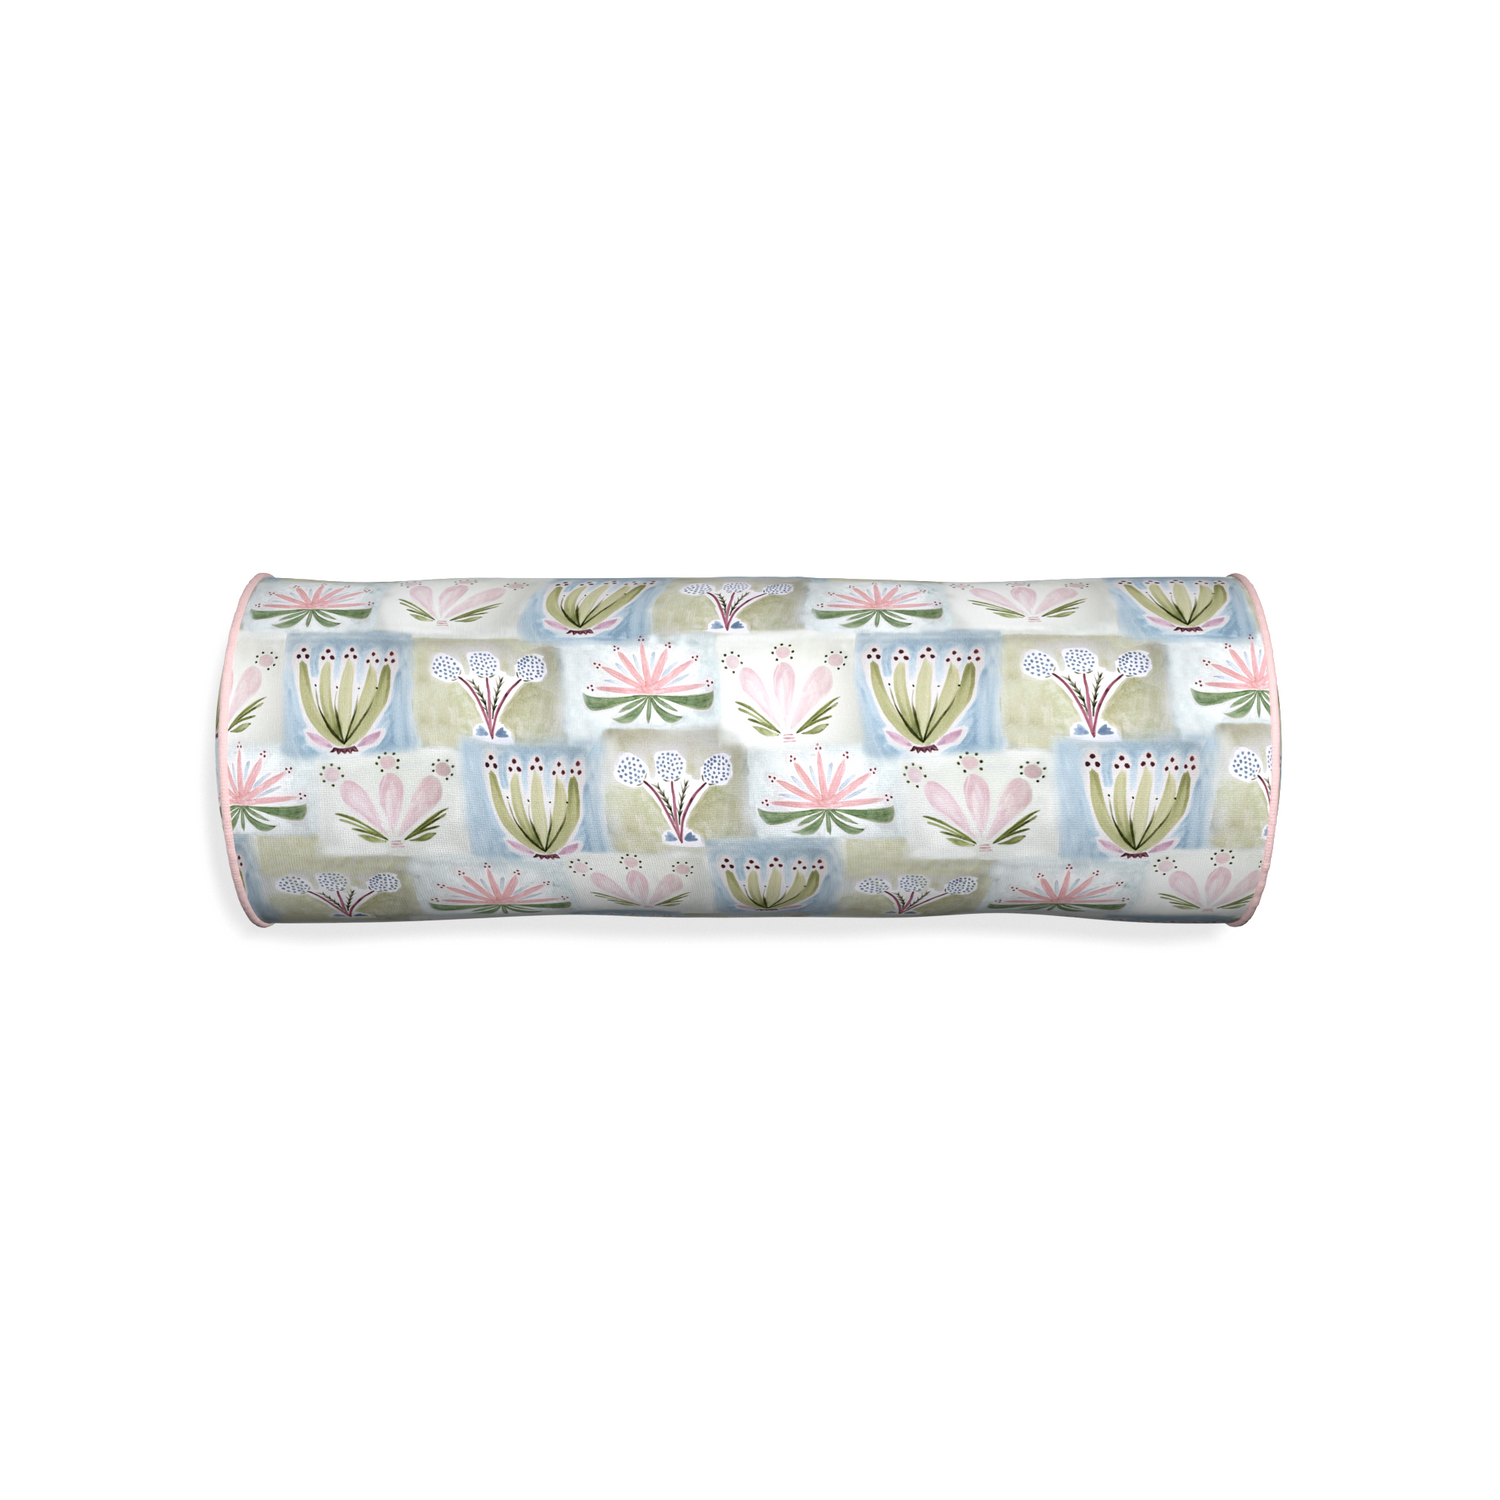 Bolster harper custom hand-painted floralpillow with petal piping on white background